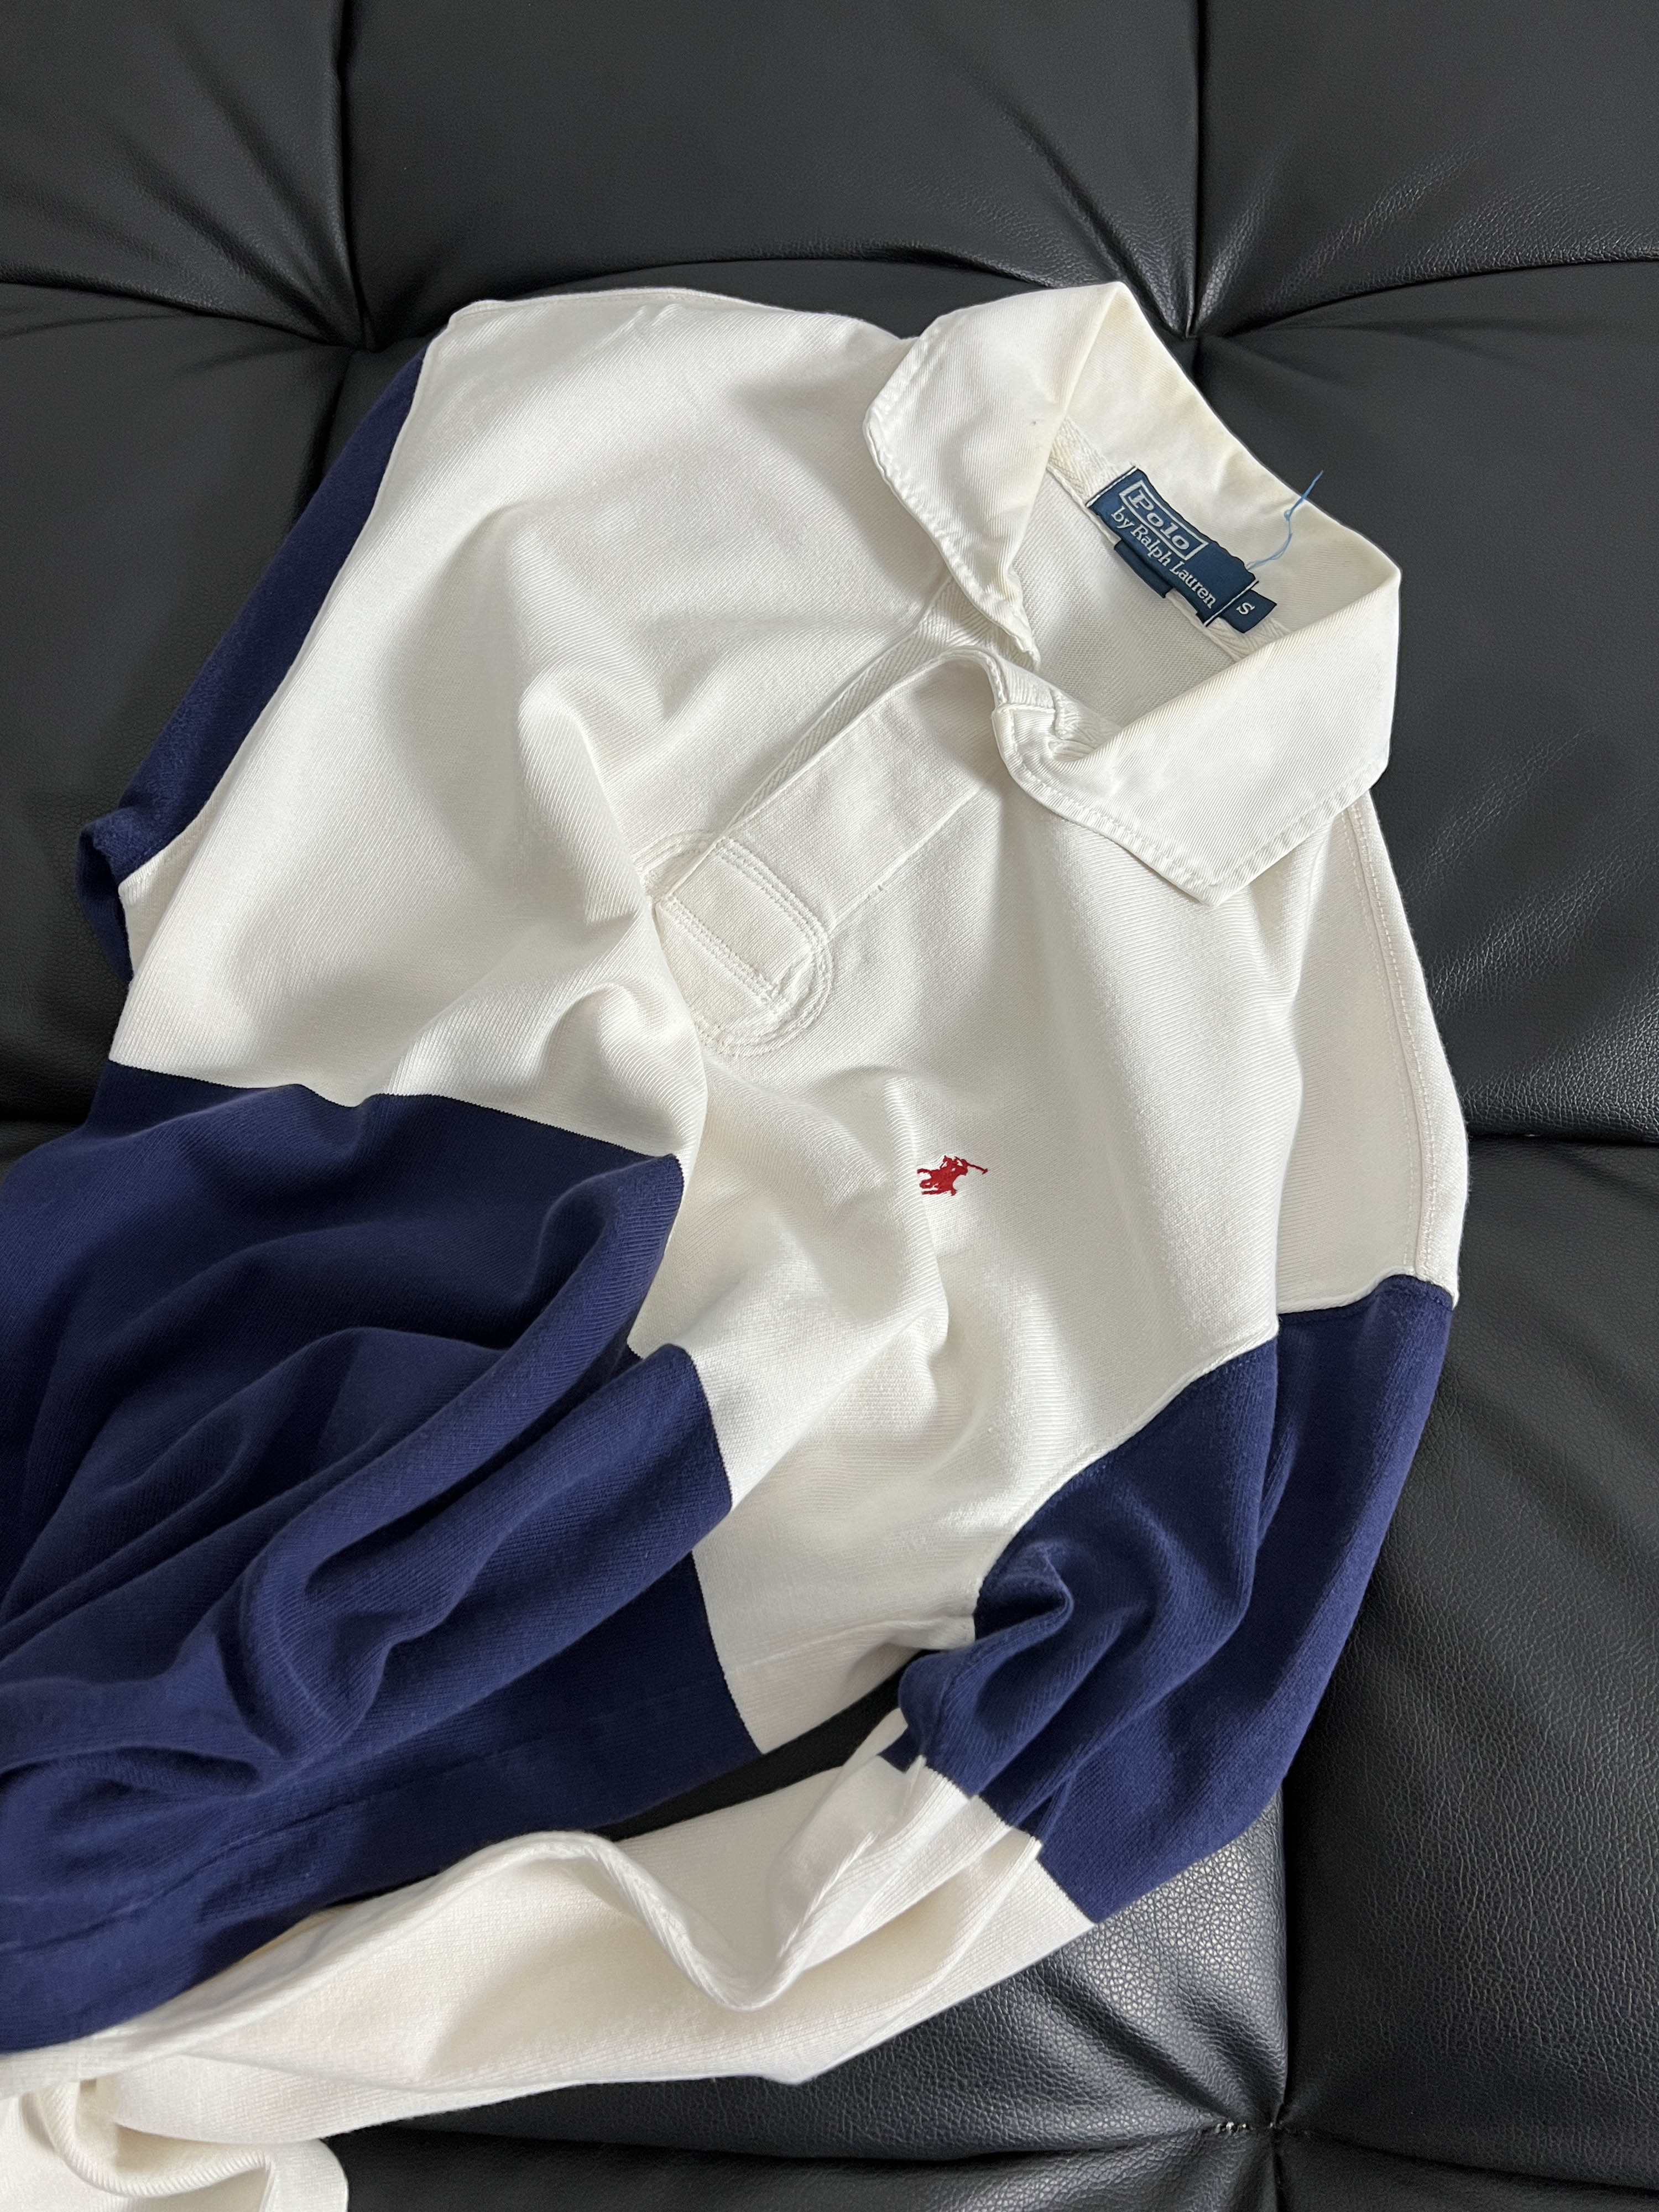 Polo by Ralph lauren colorblock rugby shirts